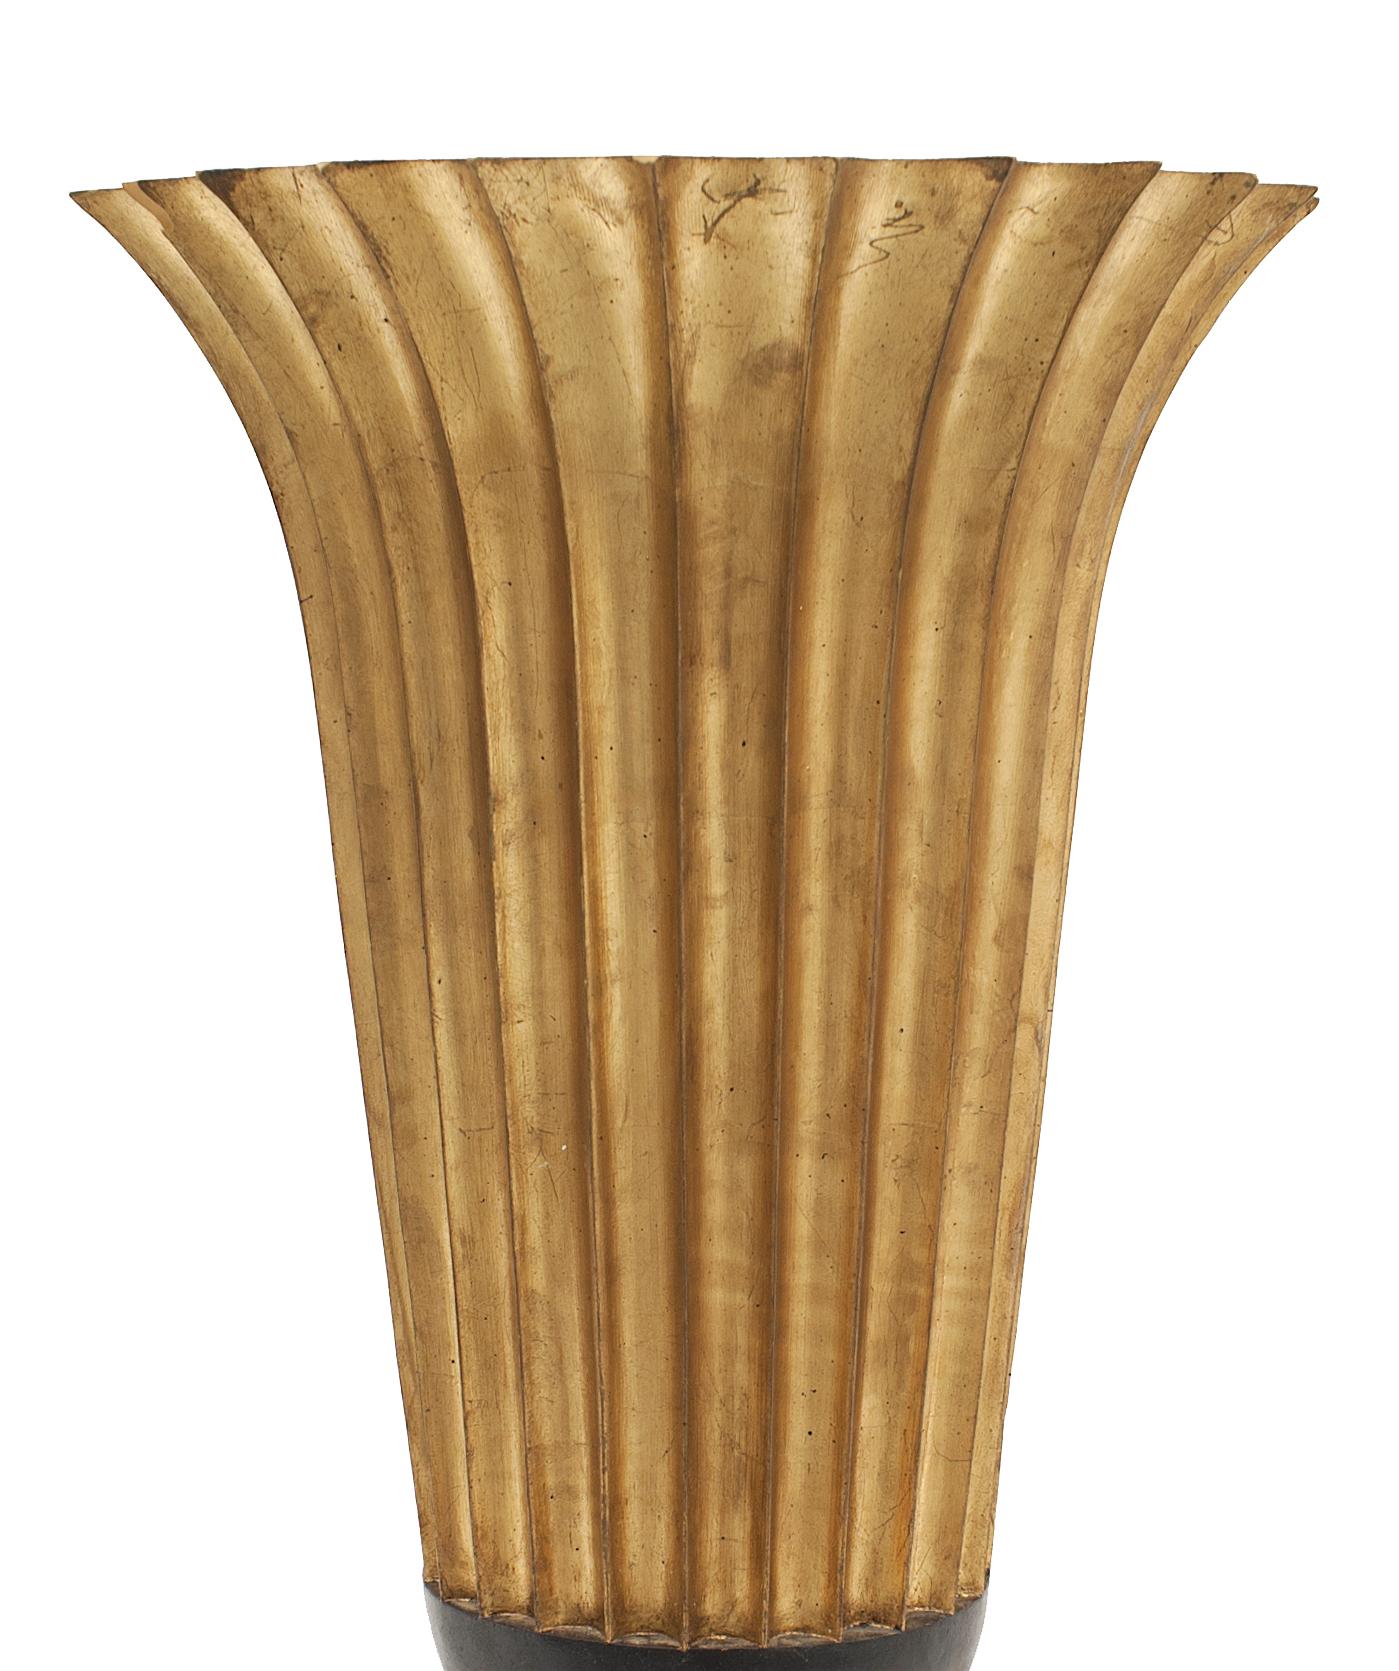 2 Art Deco-style fluted gold composition planters with faceted sides and flared tops on 6 sided star bases (PRICED EACH)
